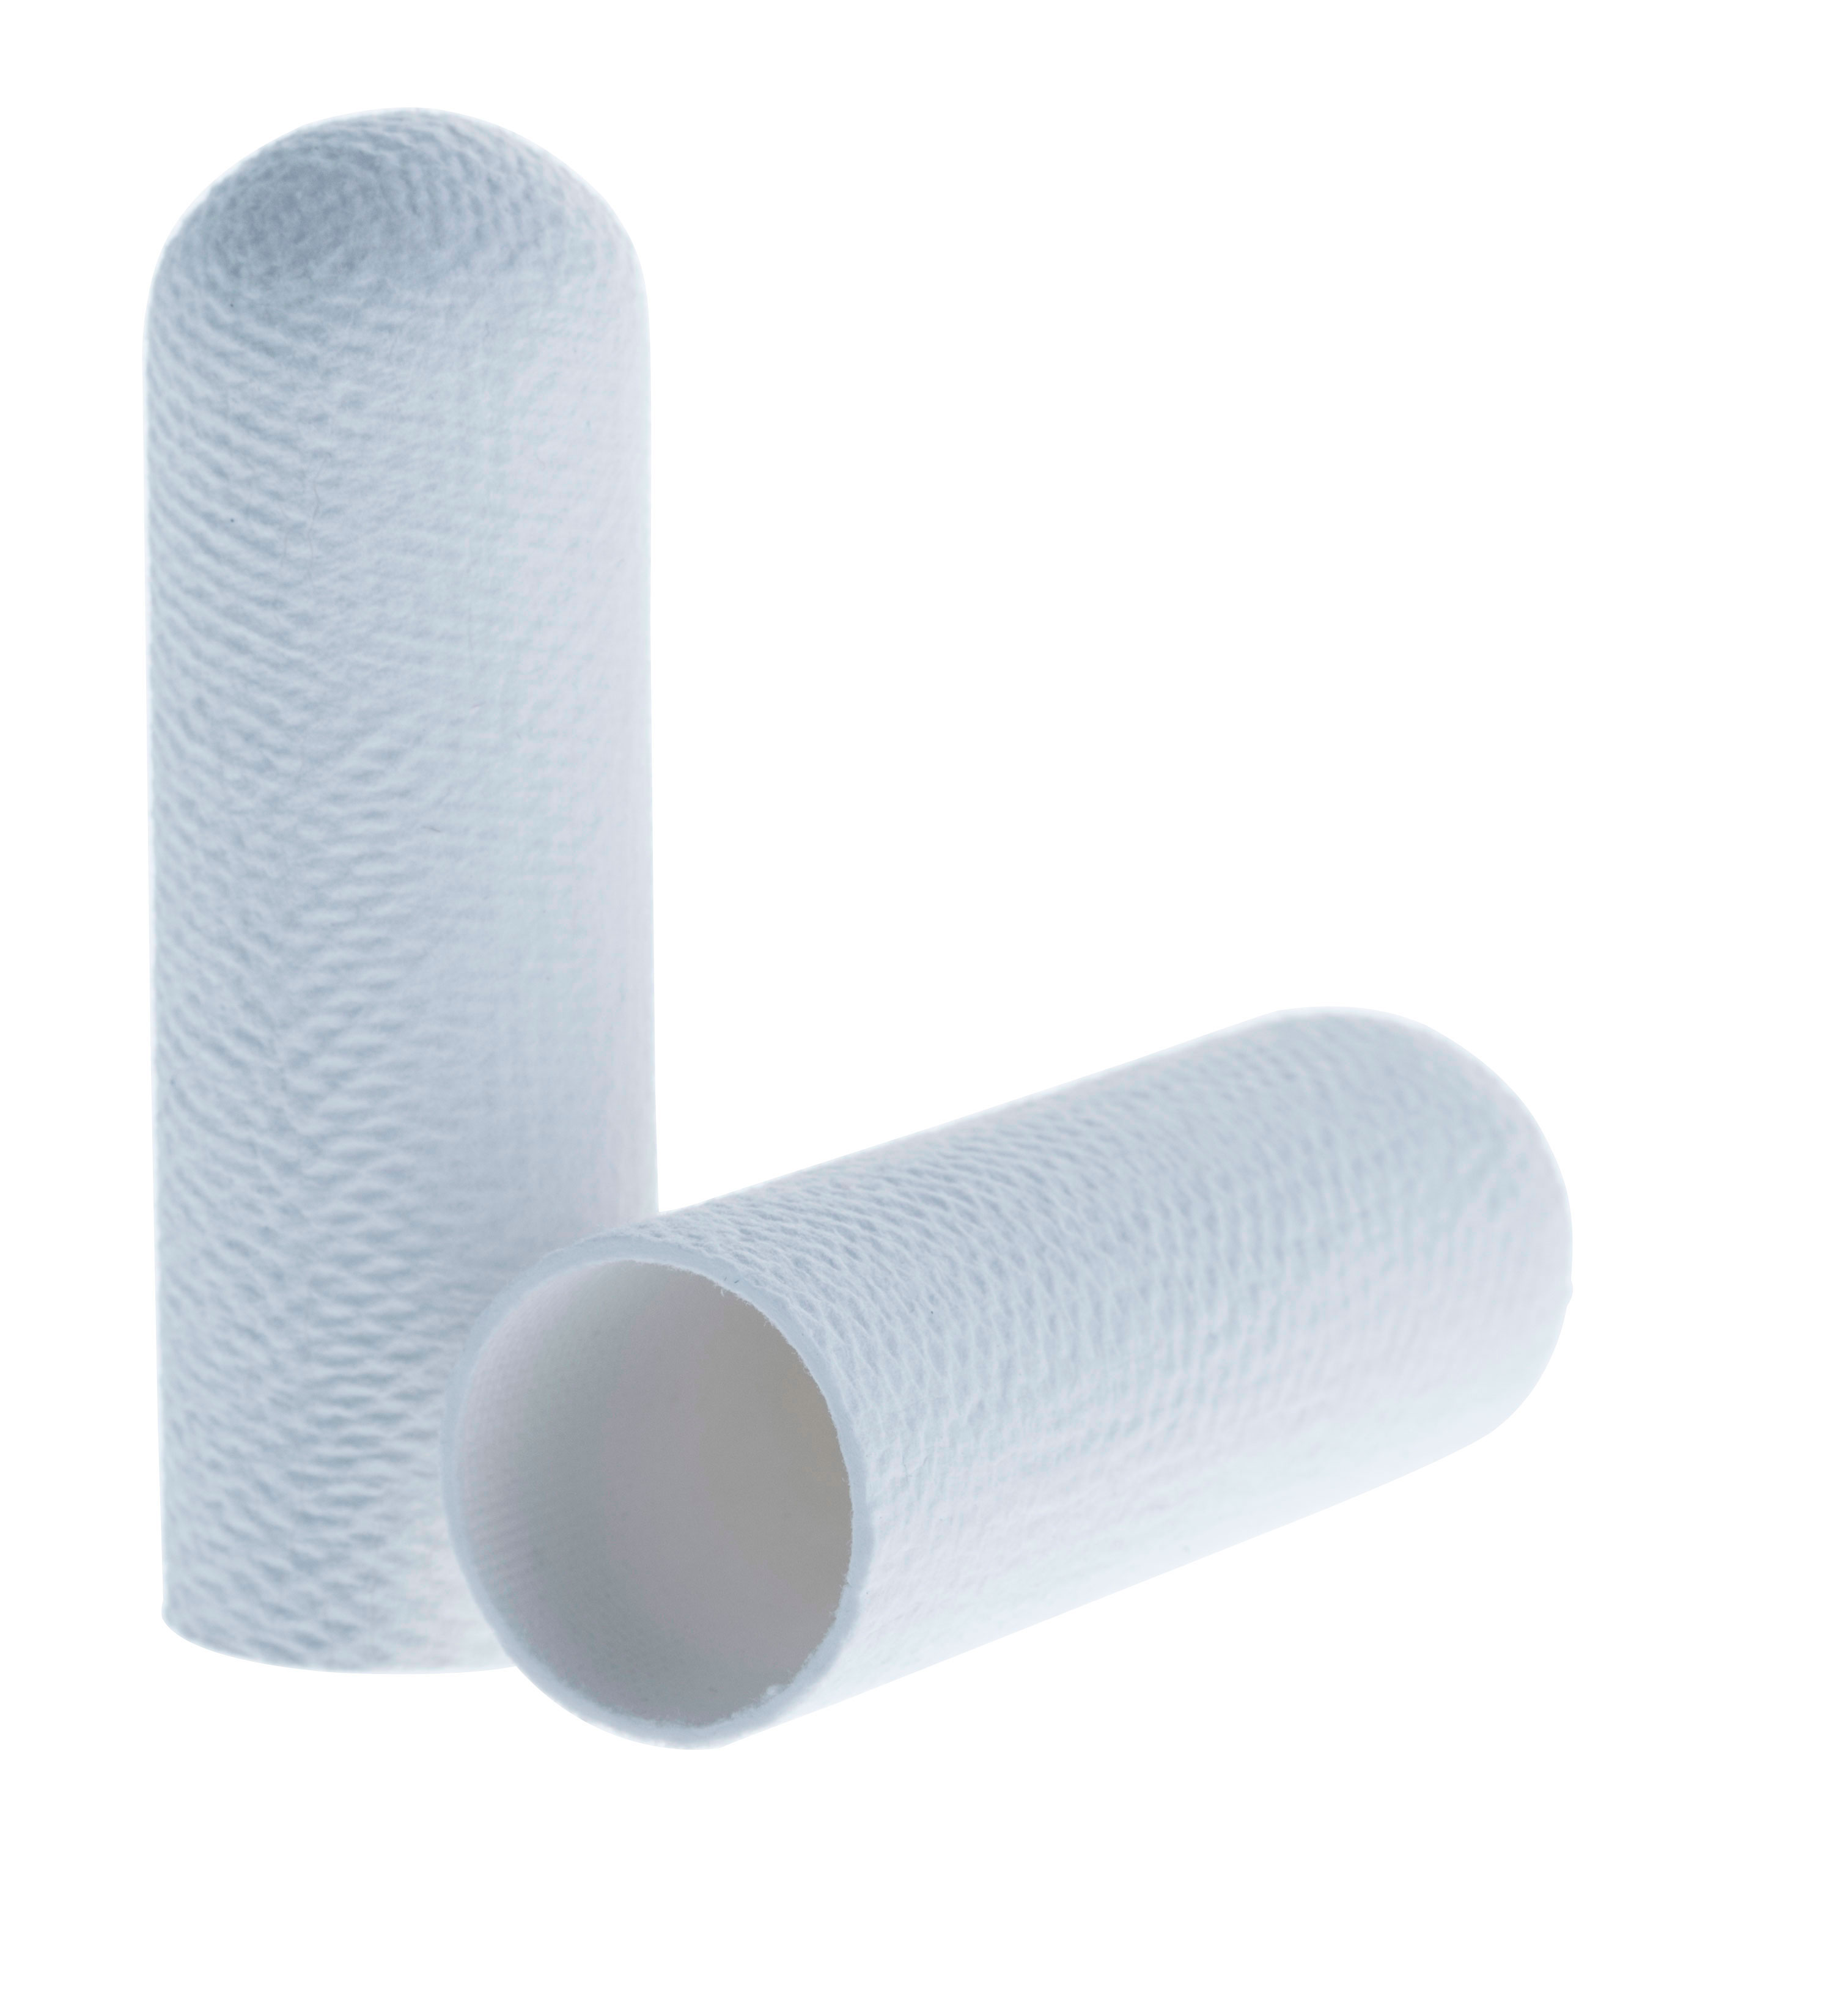 Cellulose extraction thimbles for Soxhlet extraction. SCHARLAU. Standard cellulose cartridge. Dim. Øxlength: 26x60mm. Particle retention in liquid: Nom. 8-15 microns